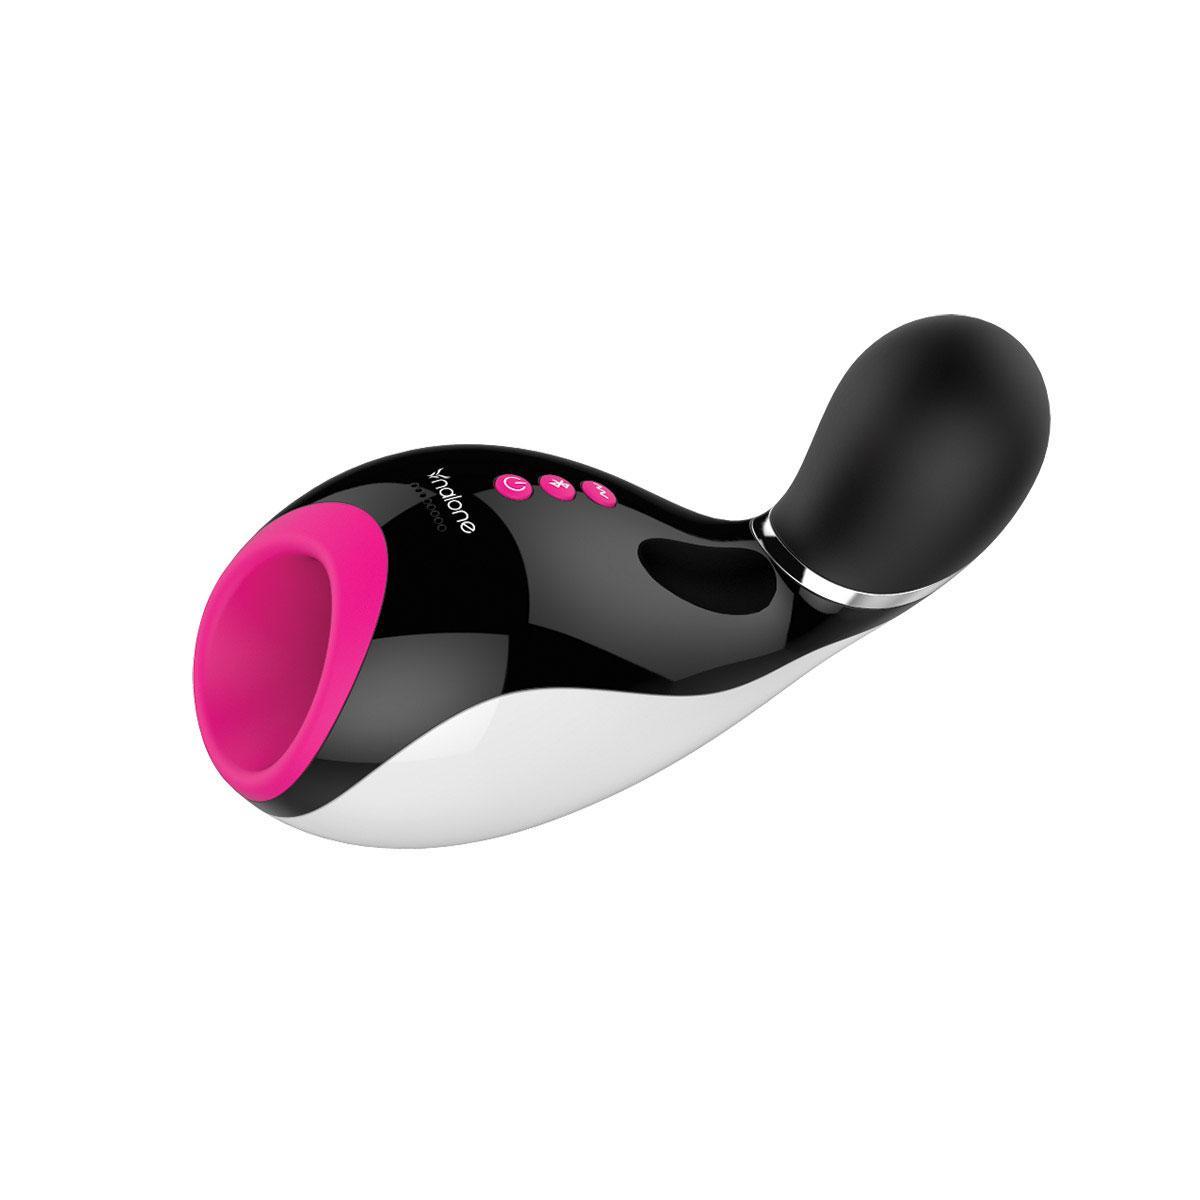 Nalone Oxxy High Tech Stroker - Buy At Luxury Toy X - Free 3-Day Shipping